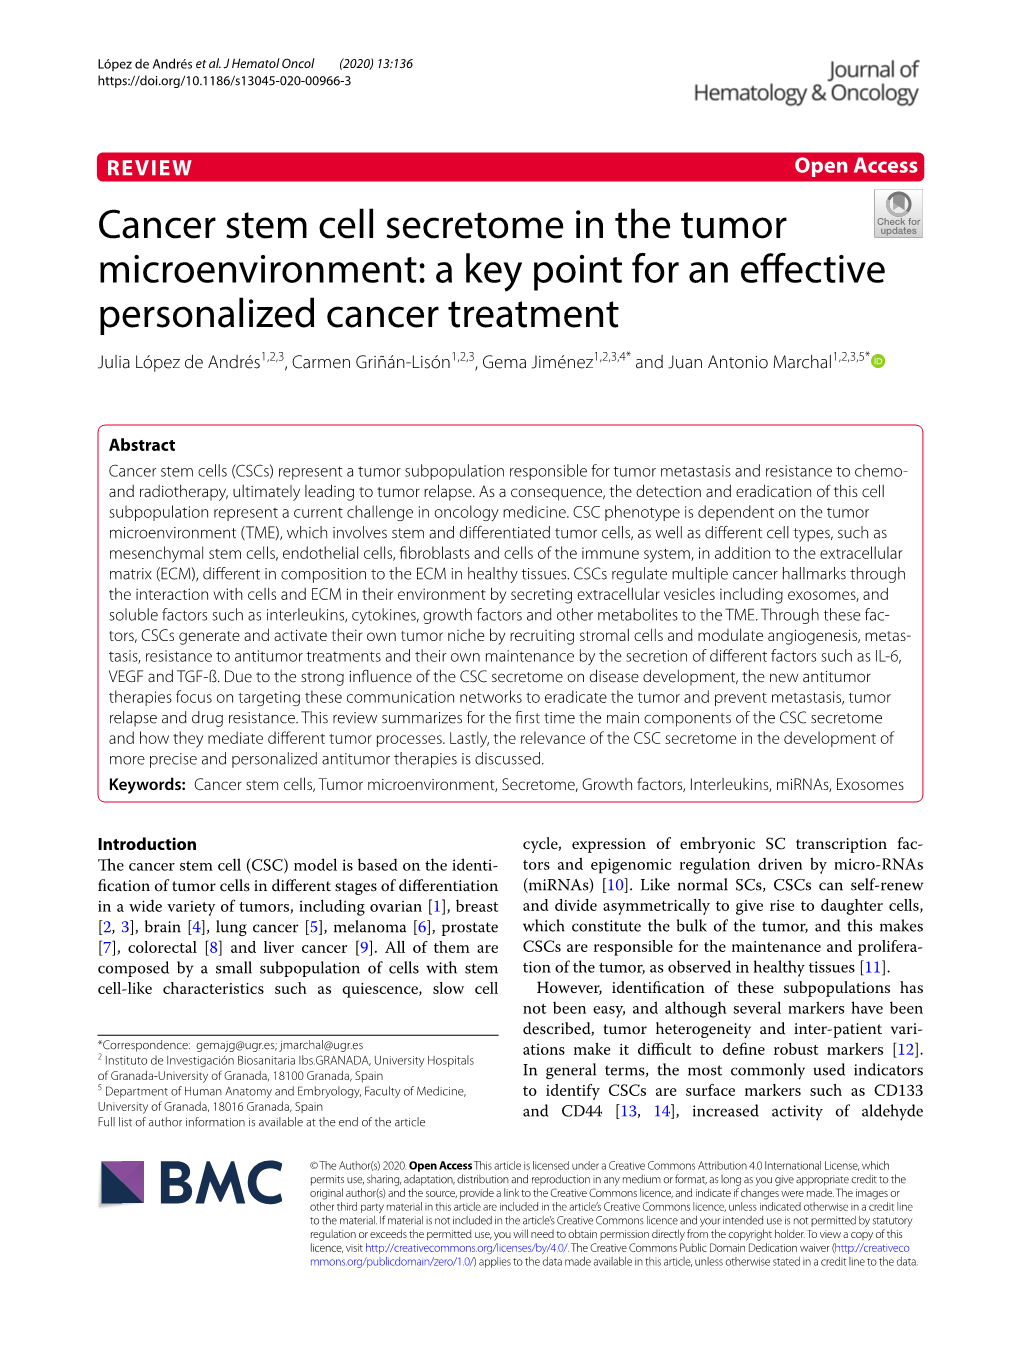 Cancer Stem Cell Secretome in the Tumor Microenvironment